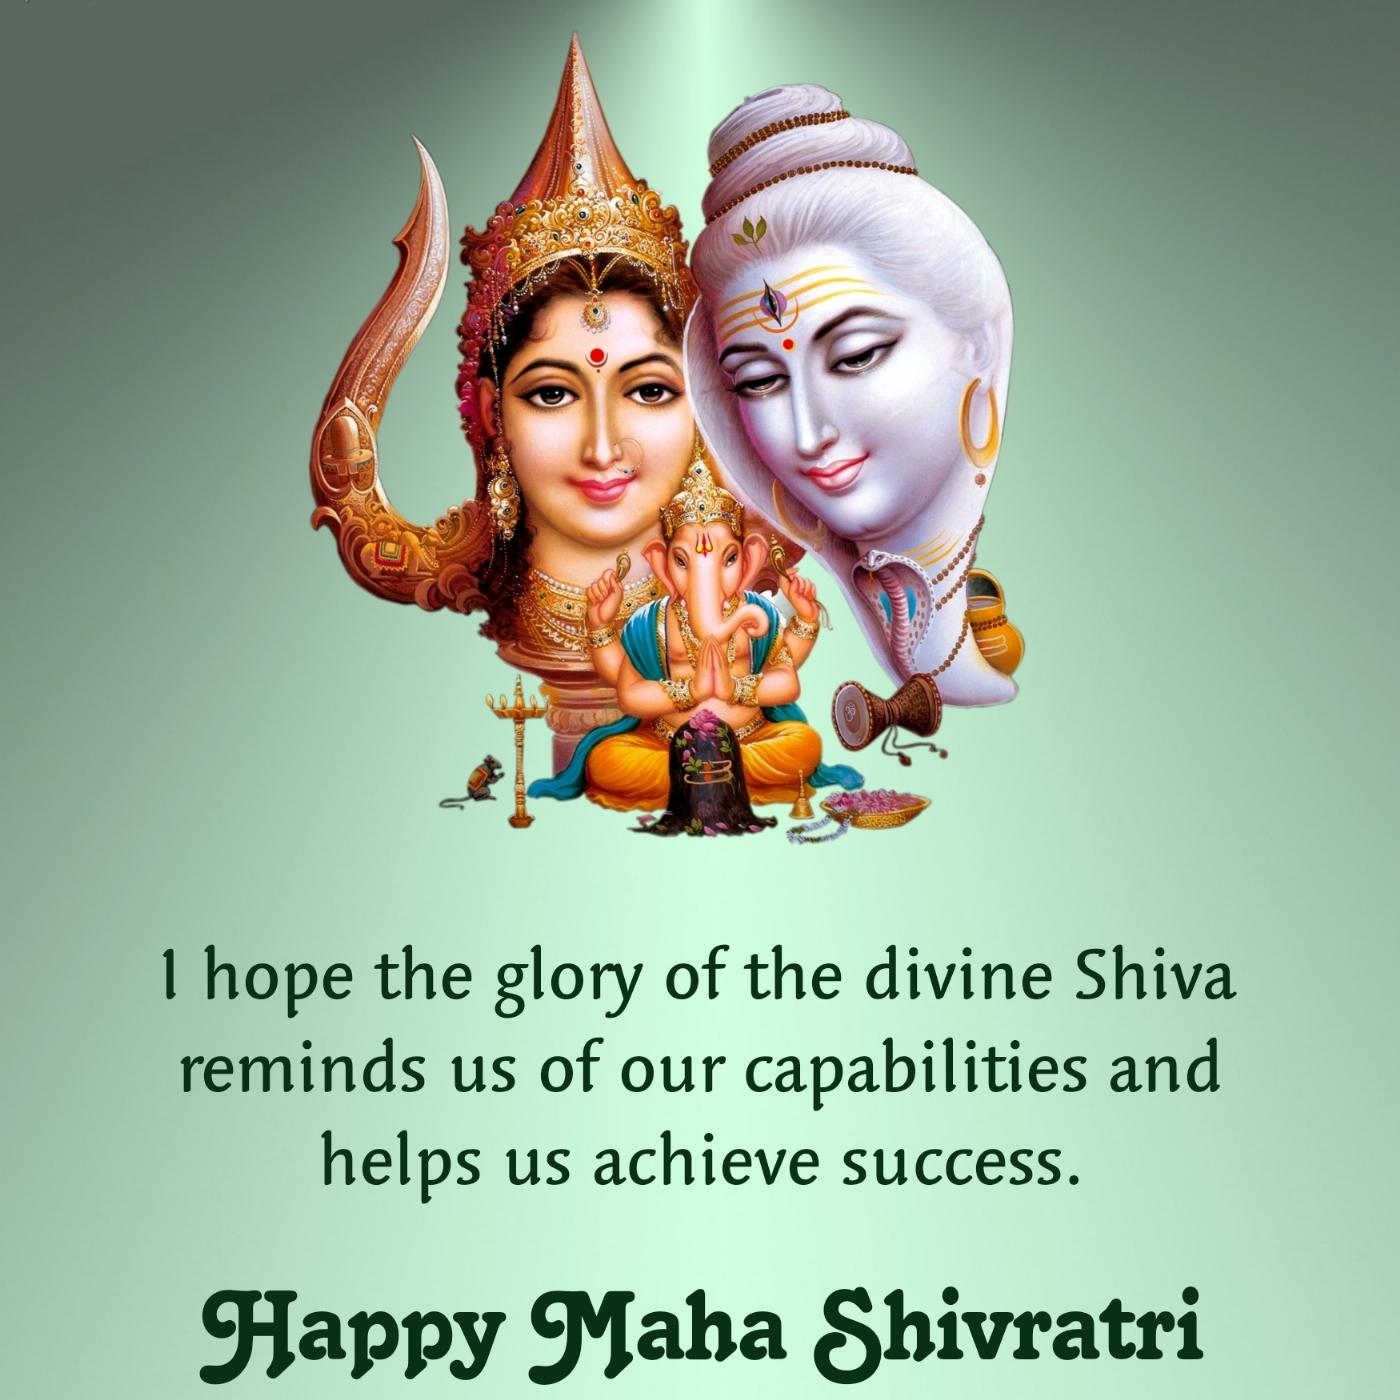 I hope the glory of the divine Shiva reminds us of our capabilities